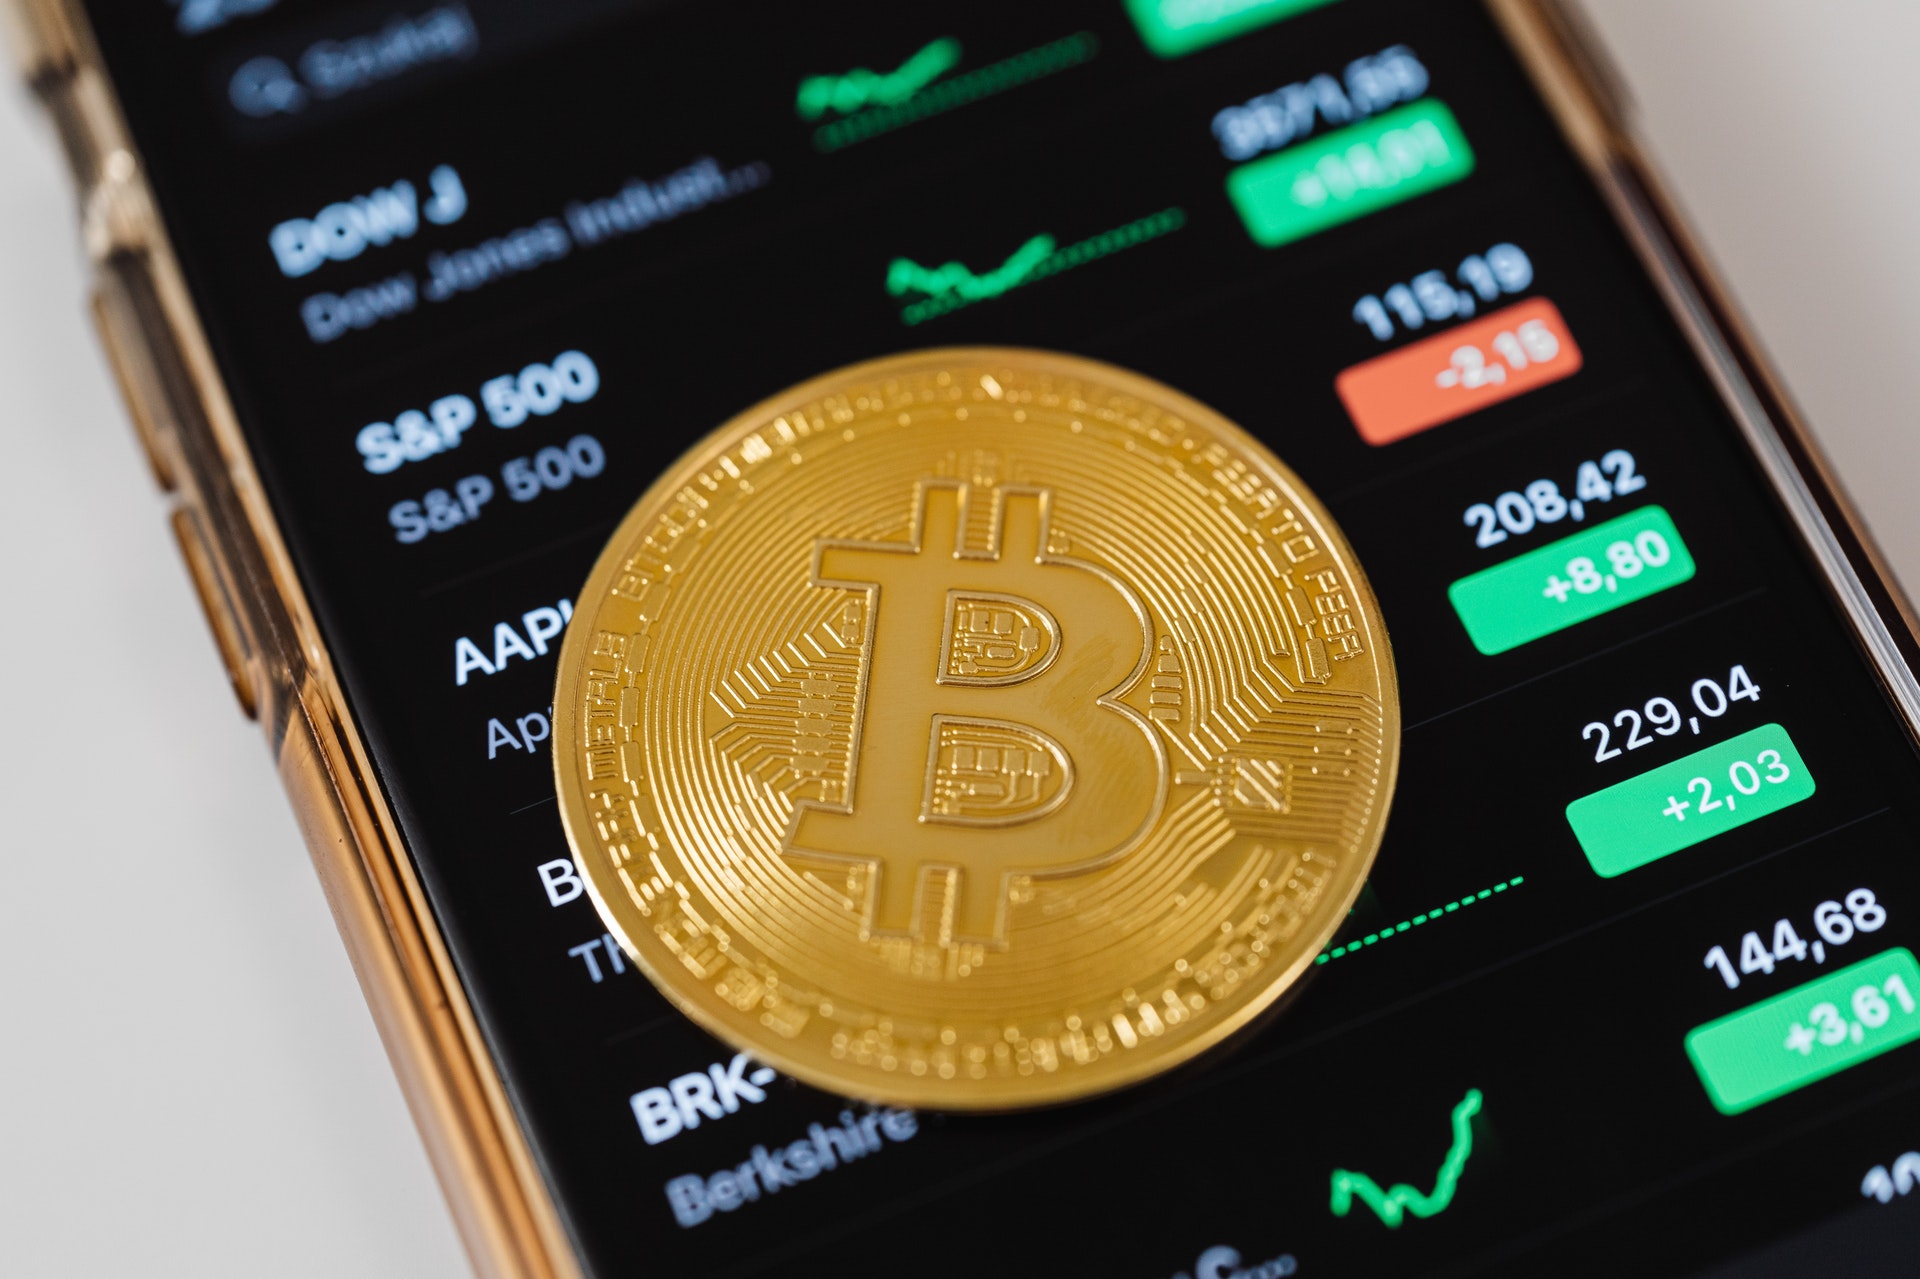 How Are Bitcoin Payments Better For Your Business And Which Companies Are Accepting Bitcoin In 2021?